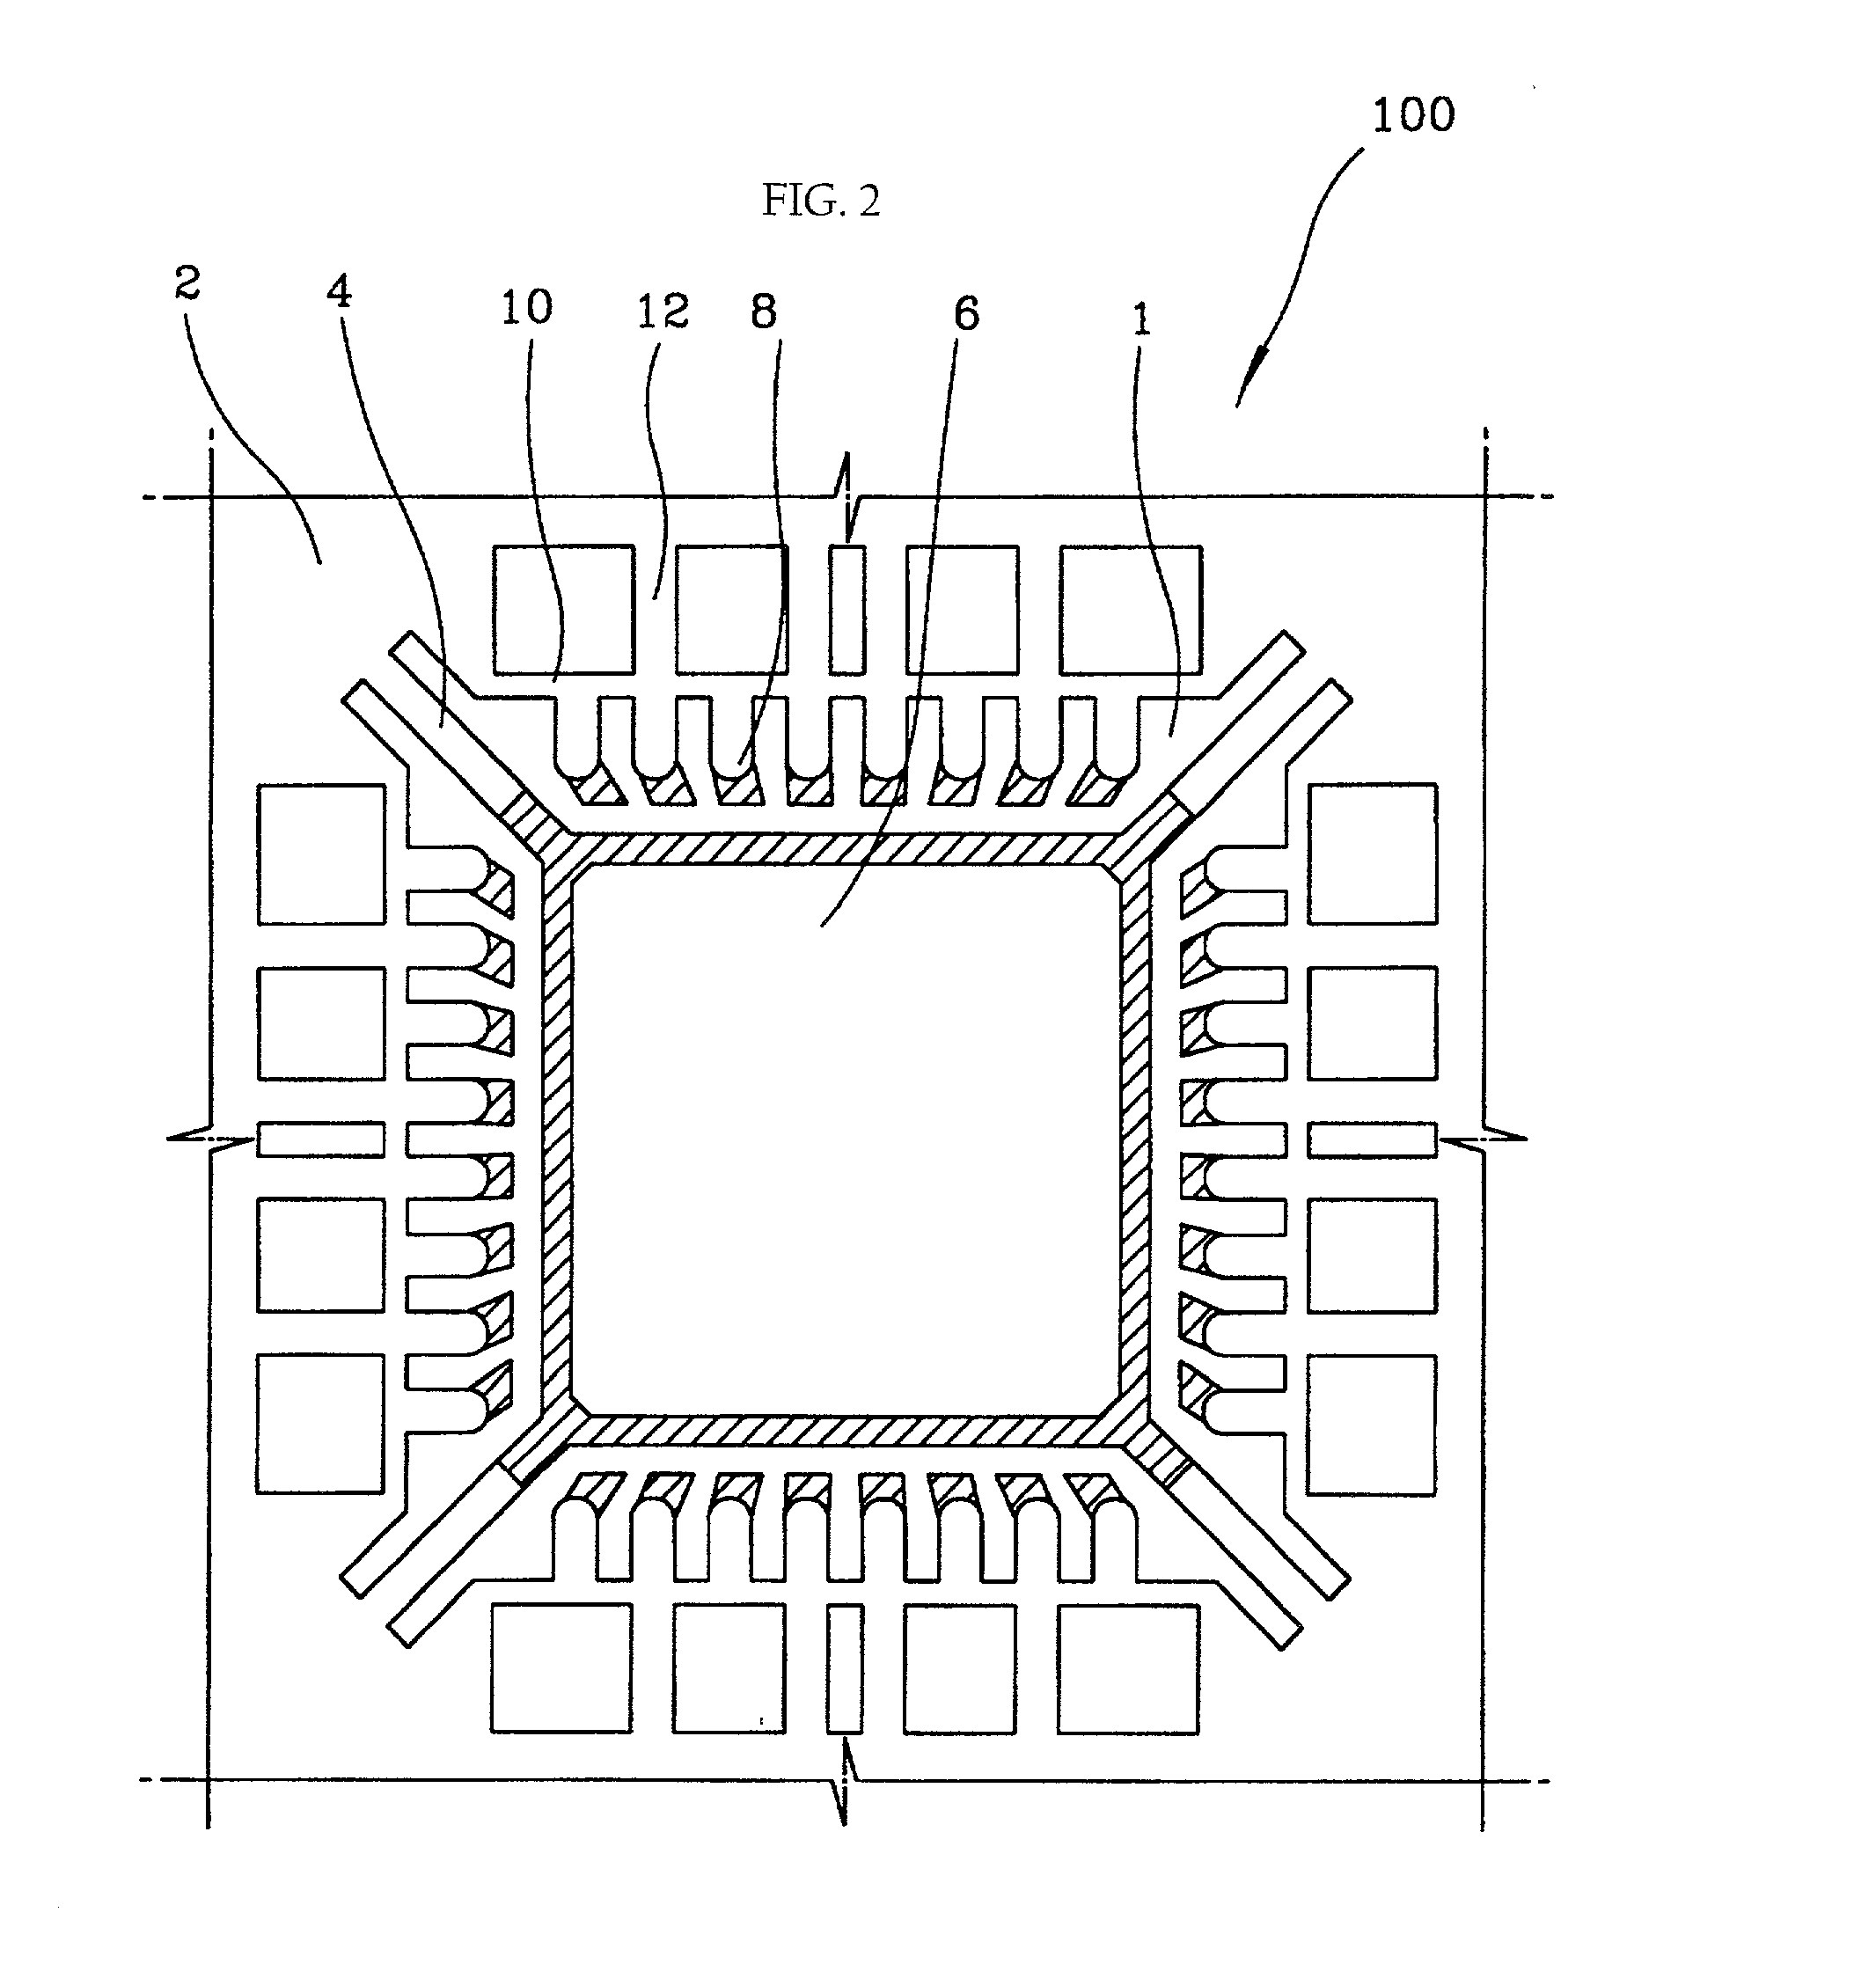 Semiconductor package with lead frame